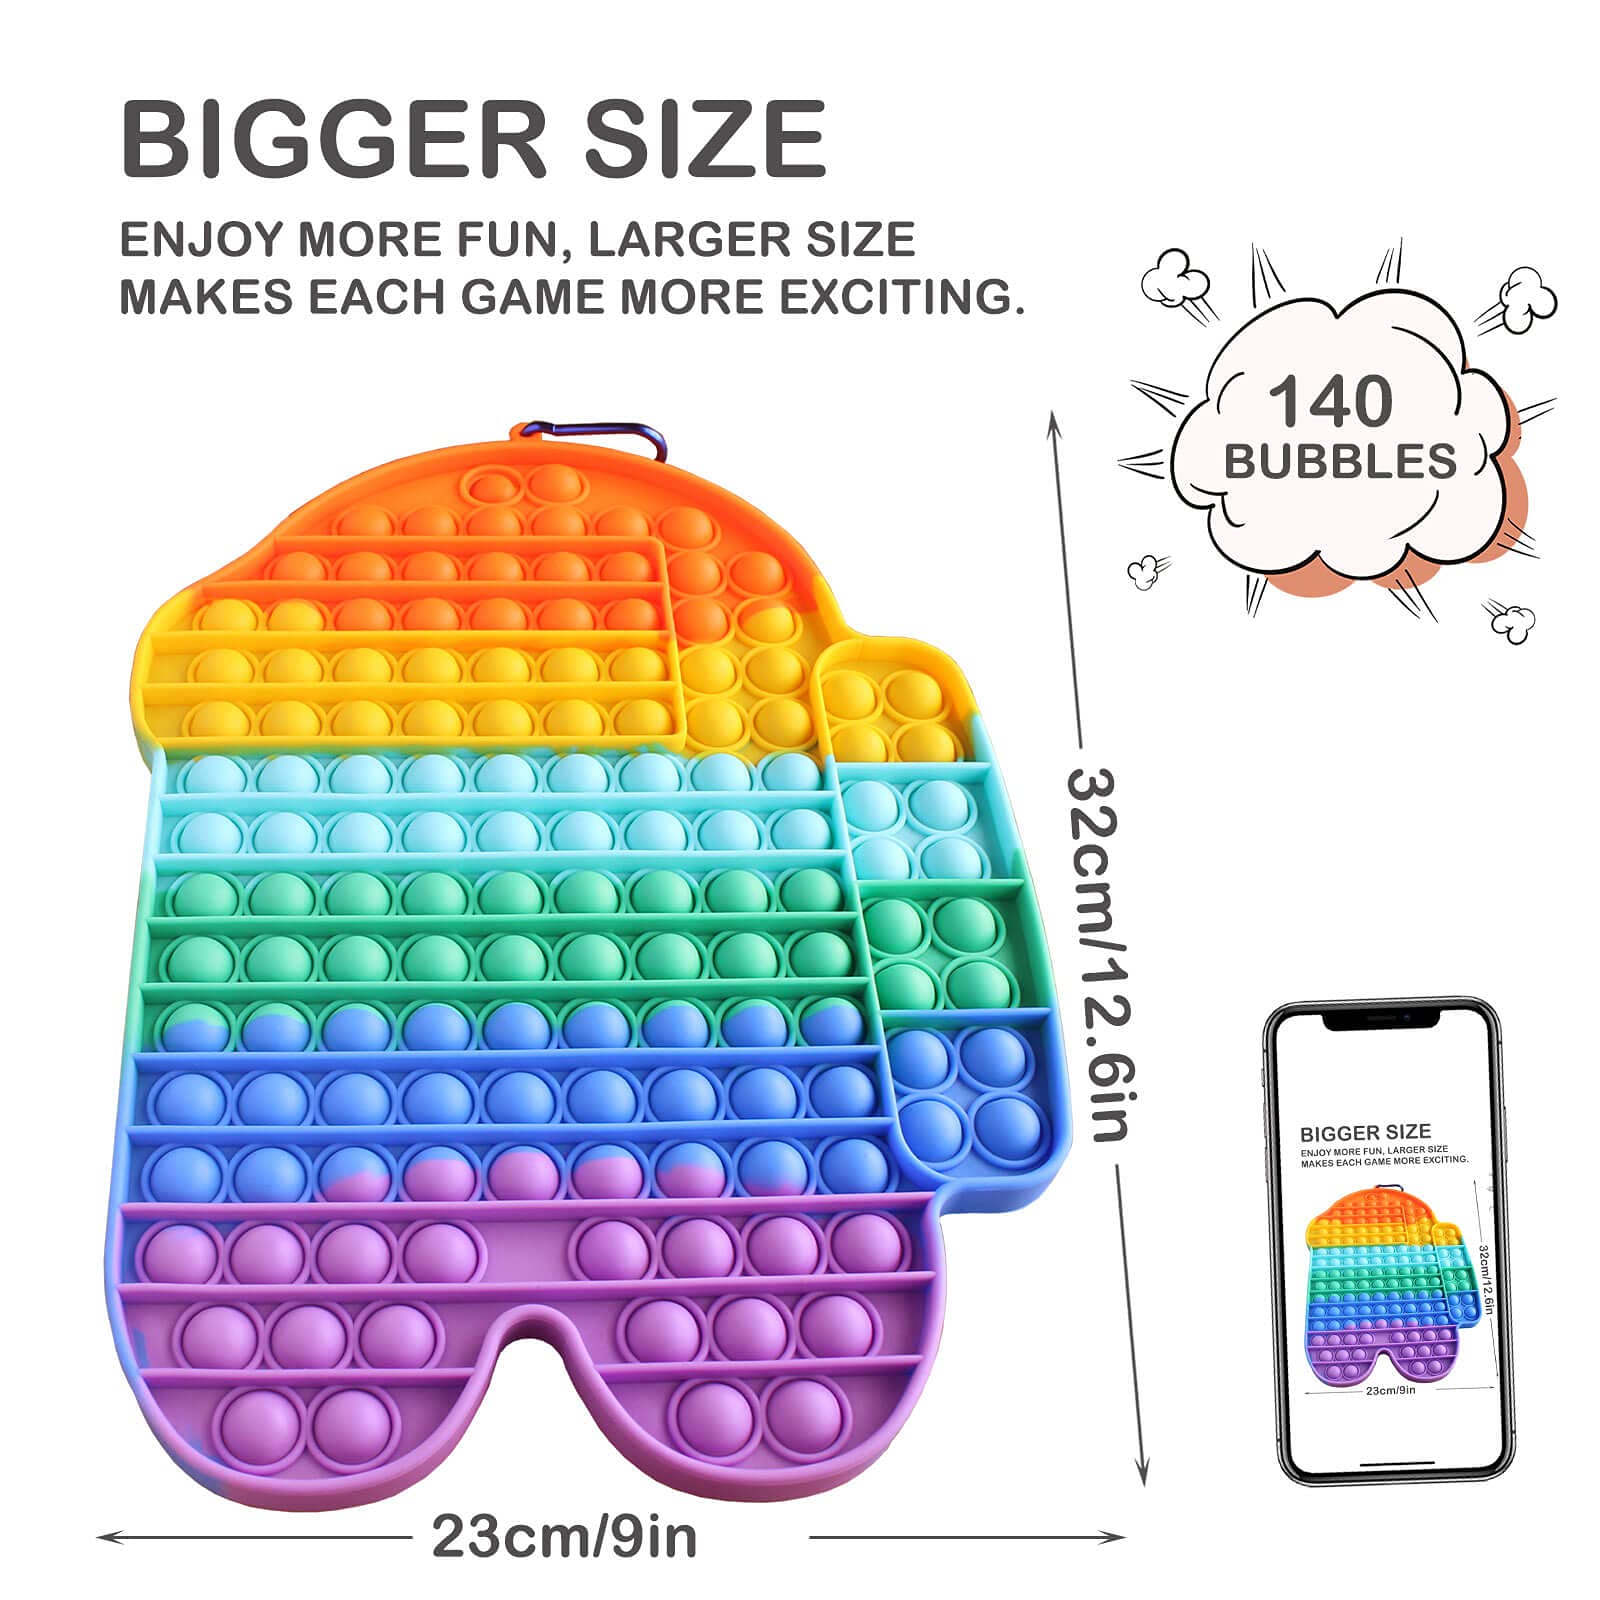 PIZZPOP Jumbo Pop Push Bubble Fidget Sensory Toy, 140 Bubbles Big Size Rainbow Silicone Fidget Popper, Stress Anxiety Relief Toys Puzzle Game Gift for Adults Kids